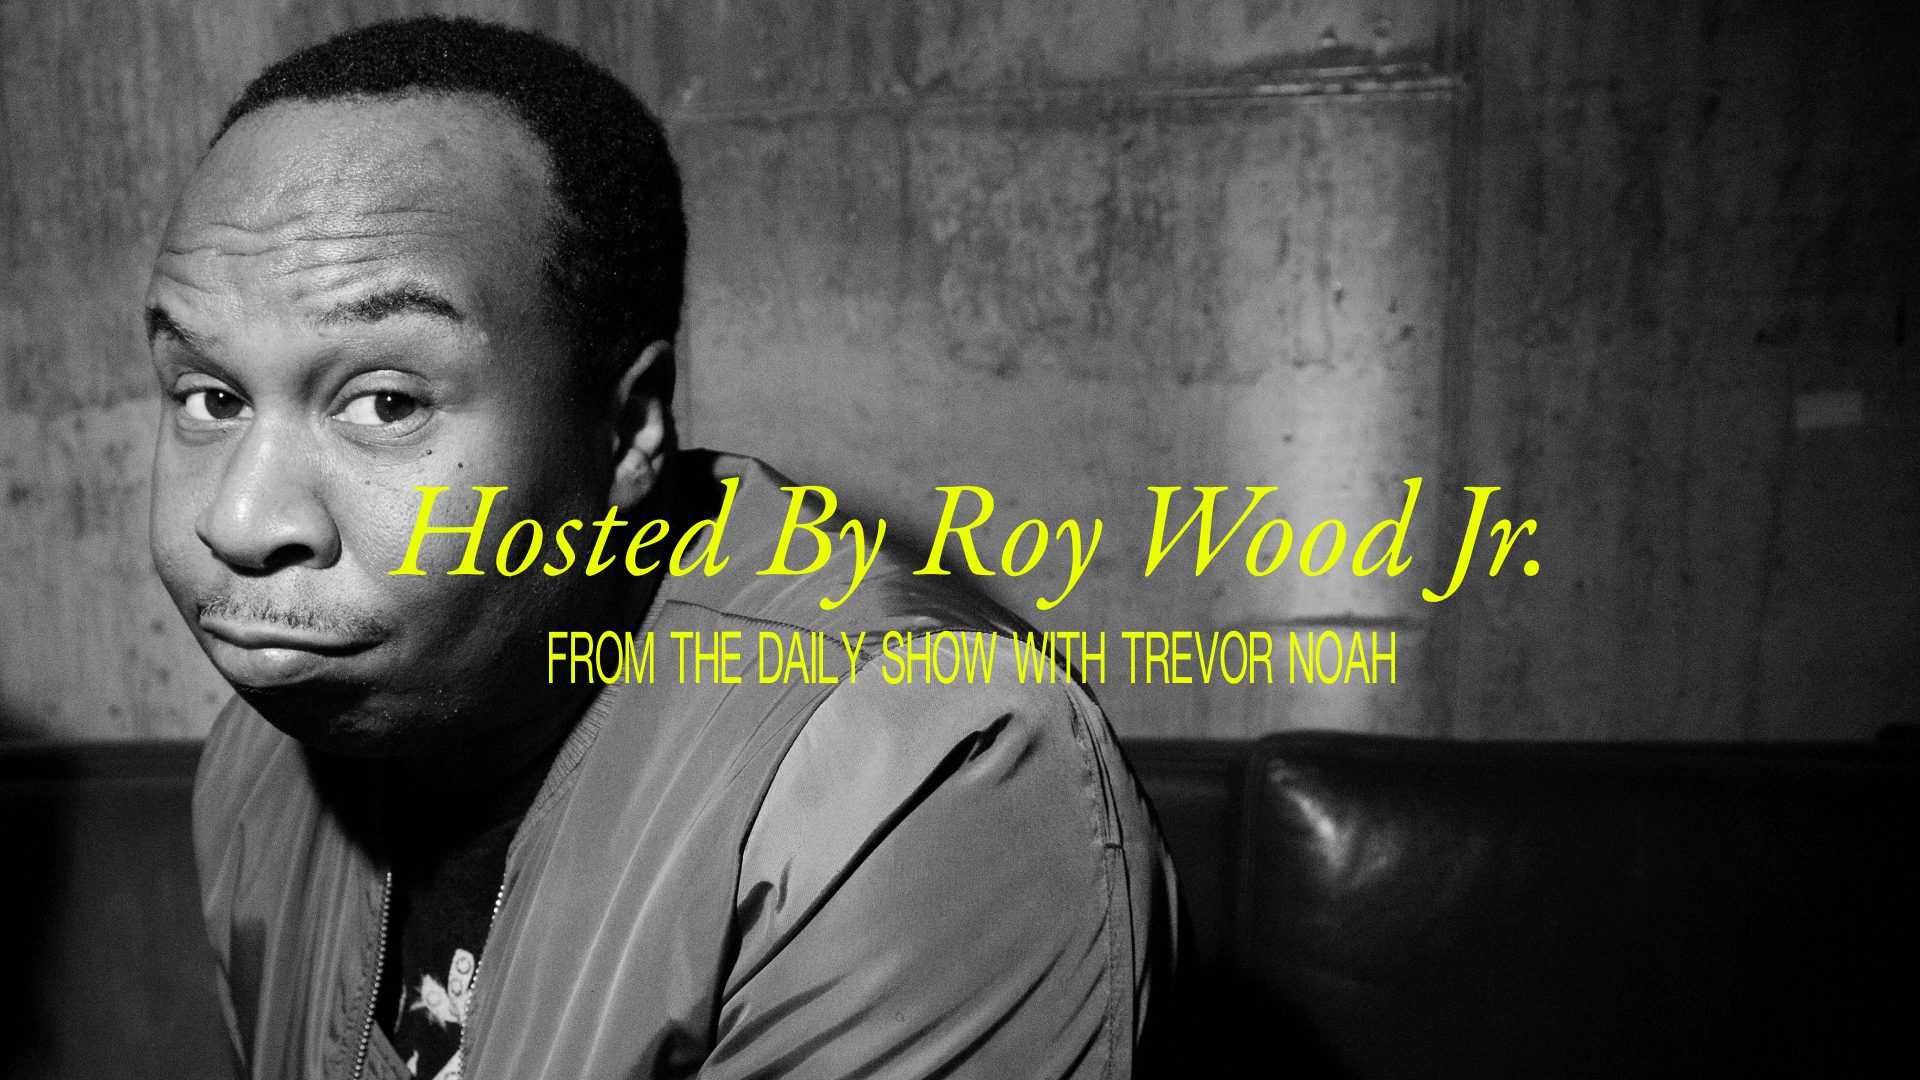 HOSTED BY ROY WOOD JR